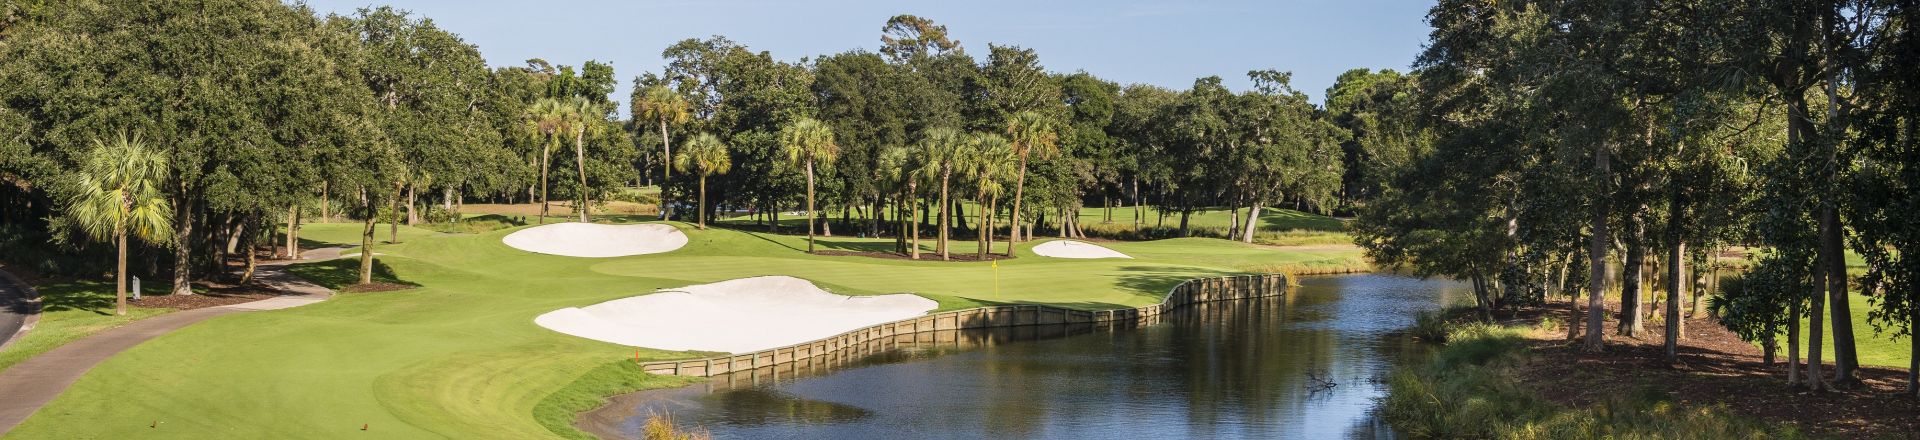 Experience the beauty of Cougar Point Golf Course at Kiawah Island Golf Resort. This captivating image captures the essence of a premier golfing destination, featuring meticulously designed fairways set against the backdrop of Kiawah's natural splendour.